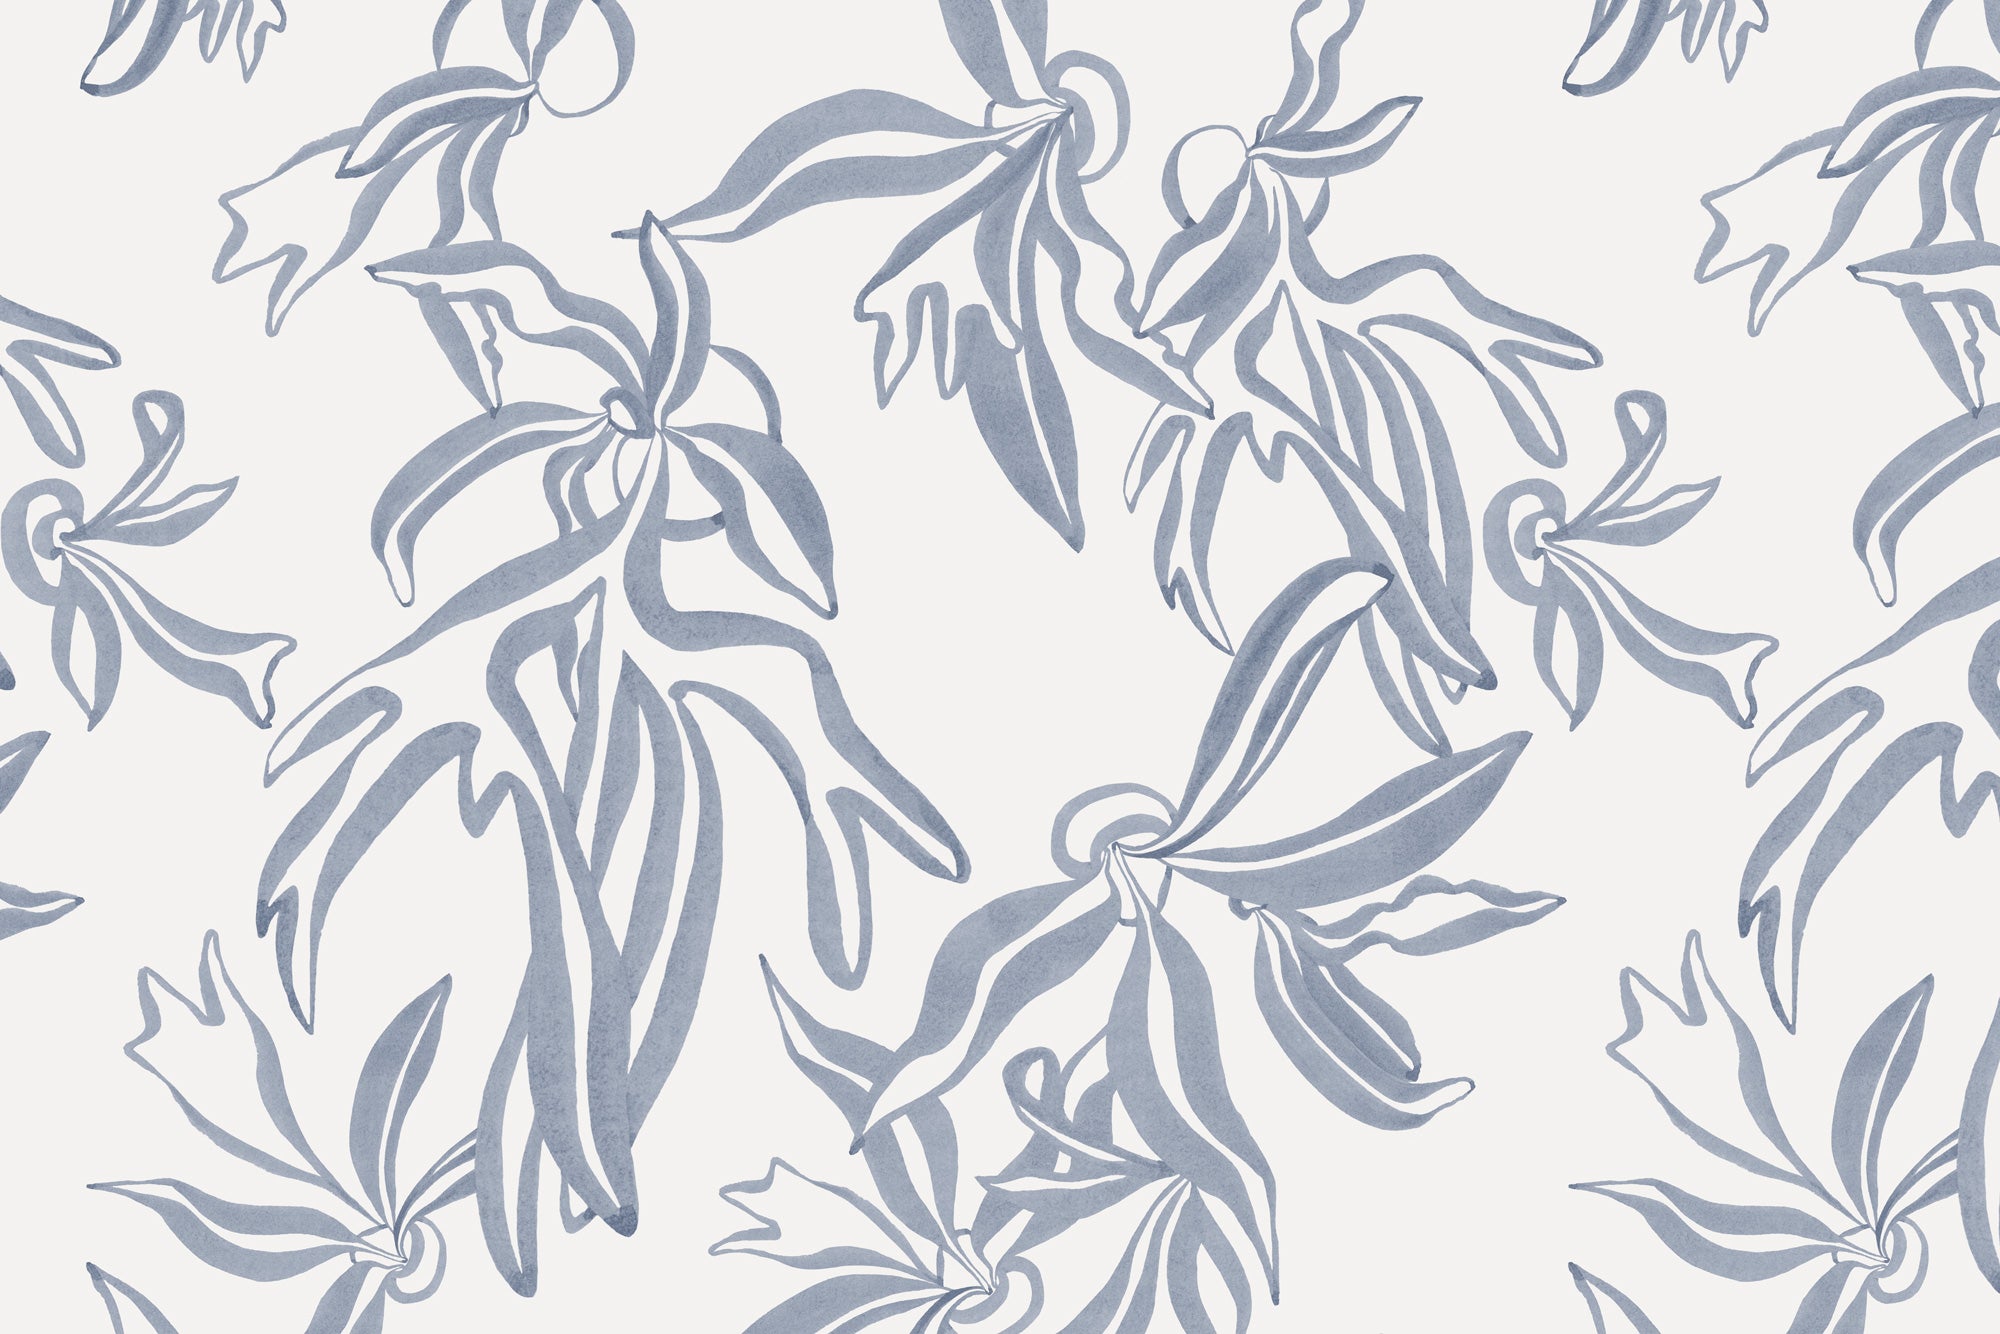 Detail of wallpaper in a painterly leaf print in blue-gray on a white field.